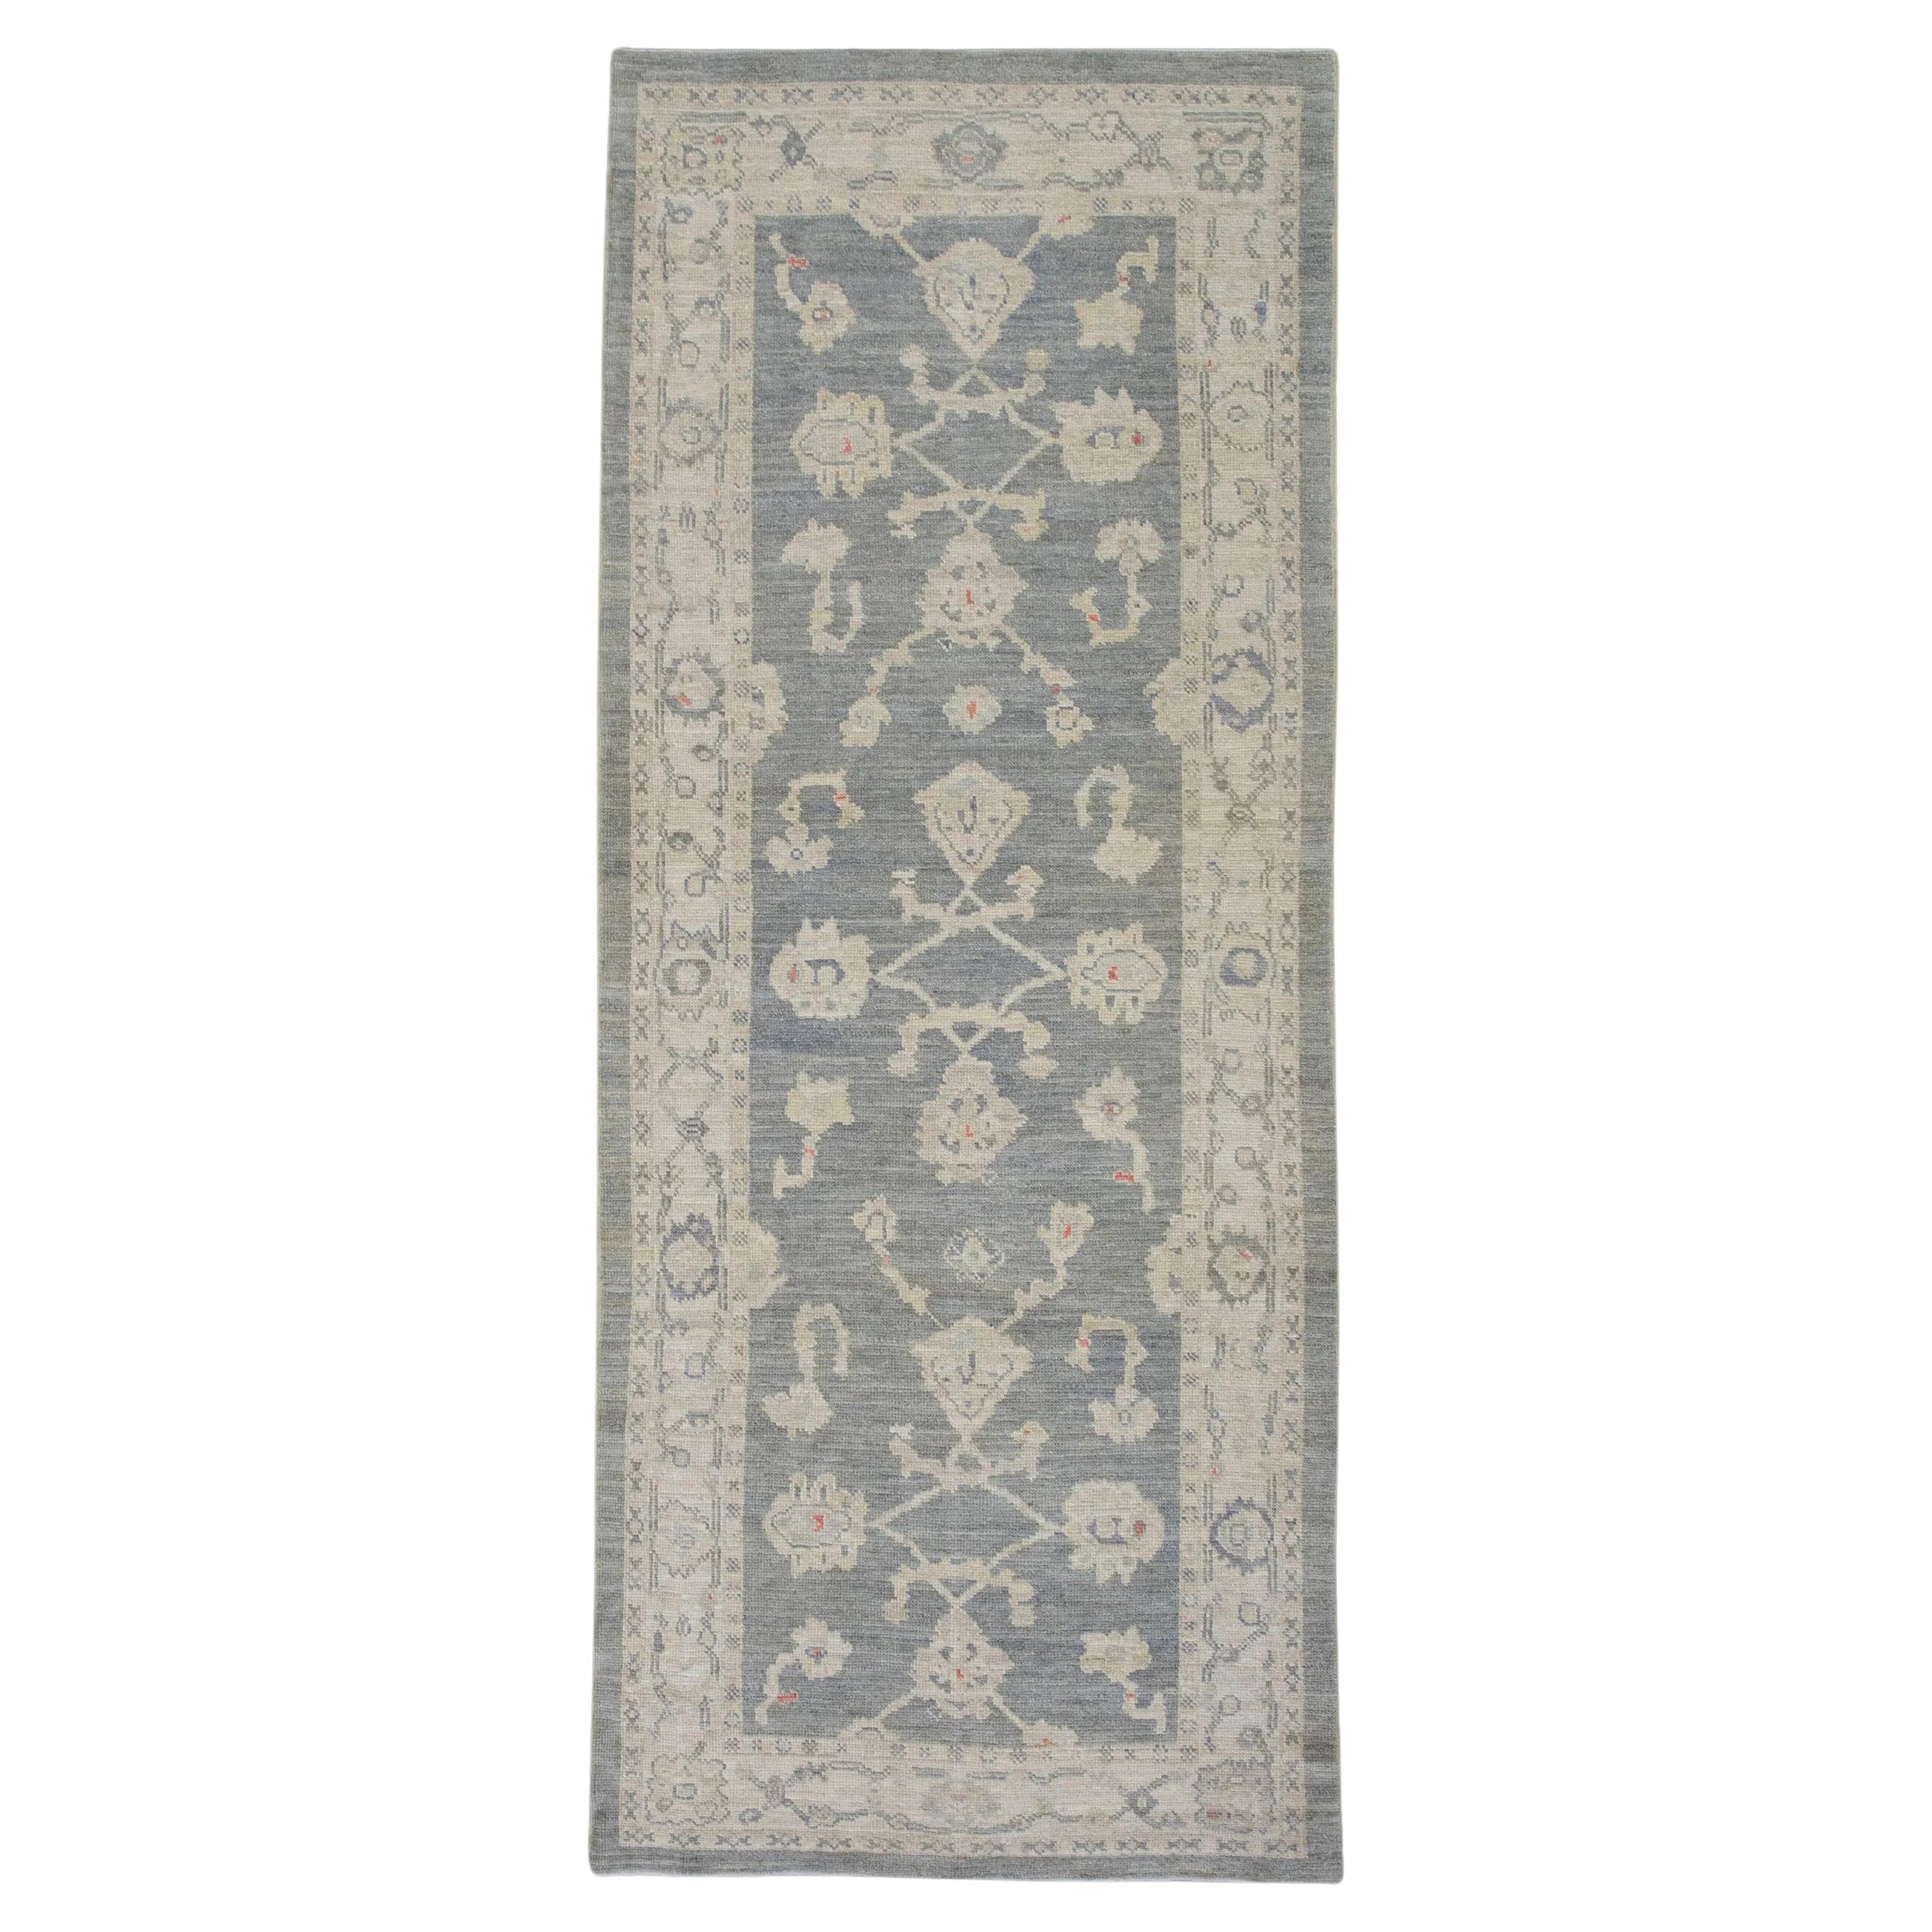 Blue Floral Handwoven Wool Turkish Oushak Rug 3'10" x 10'5" For Sale